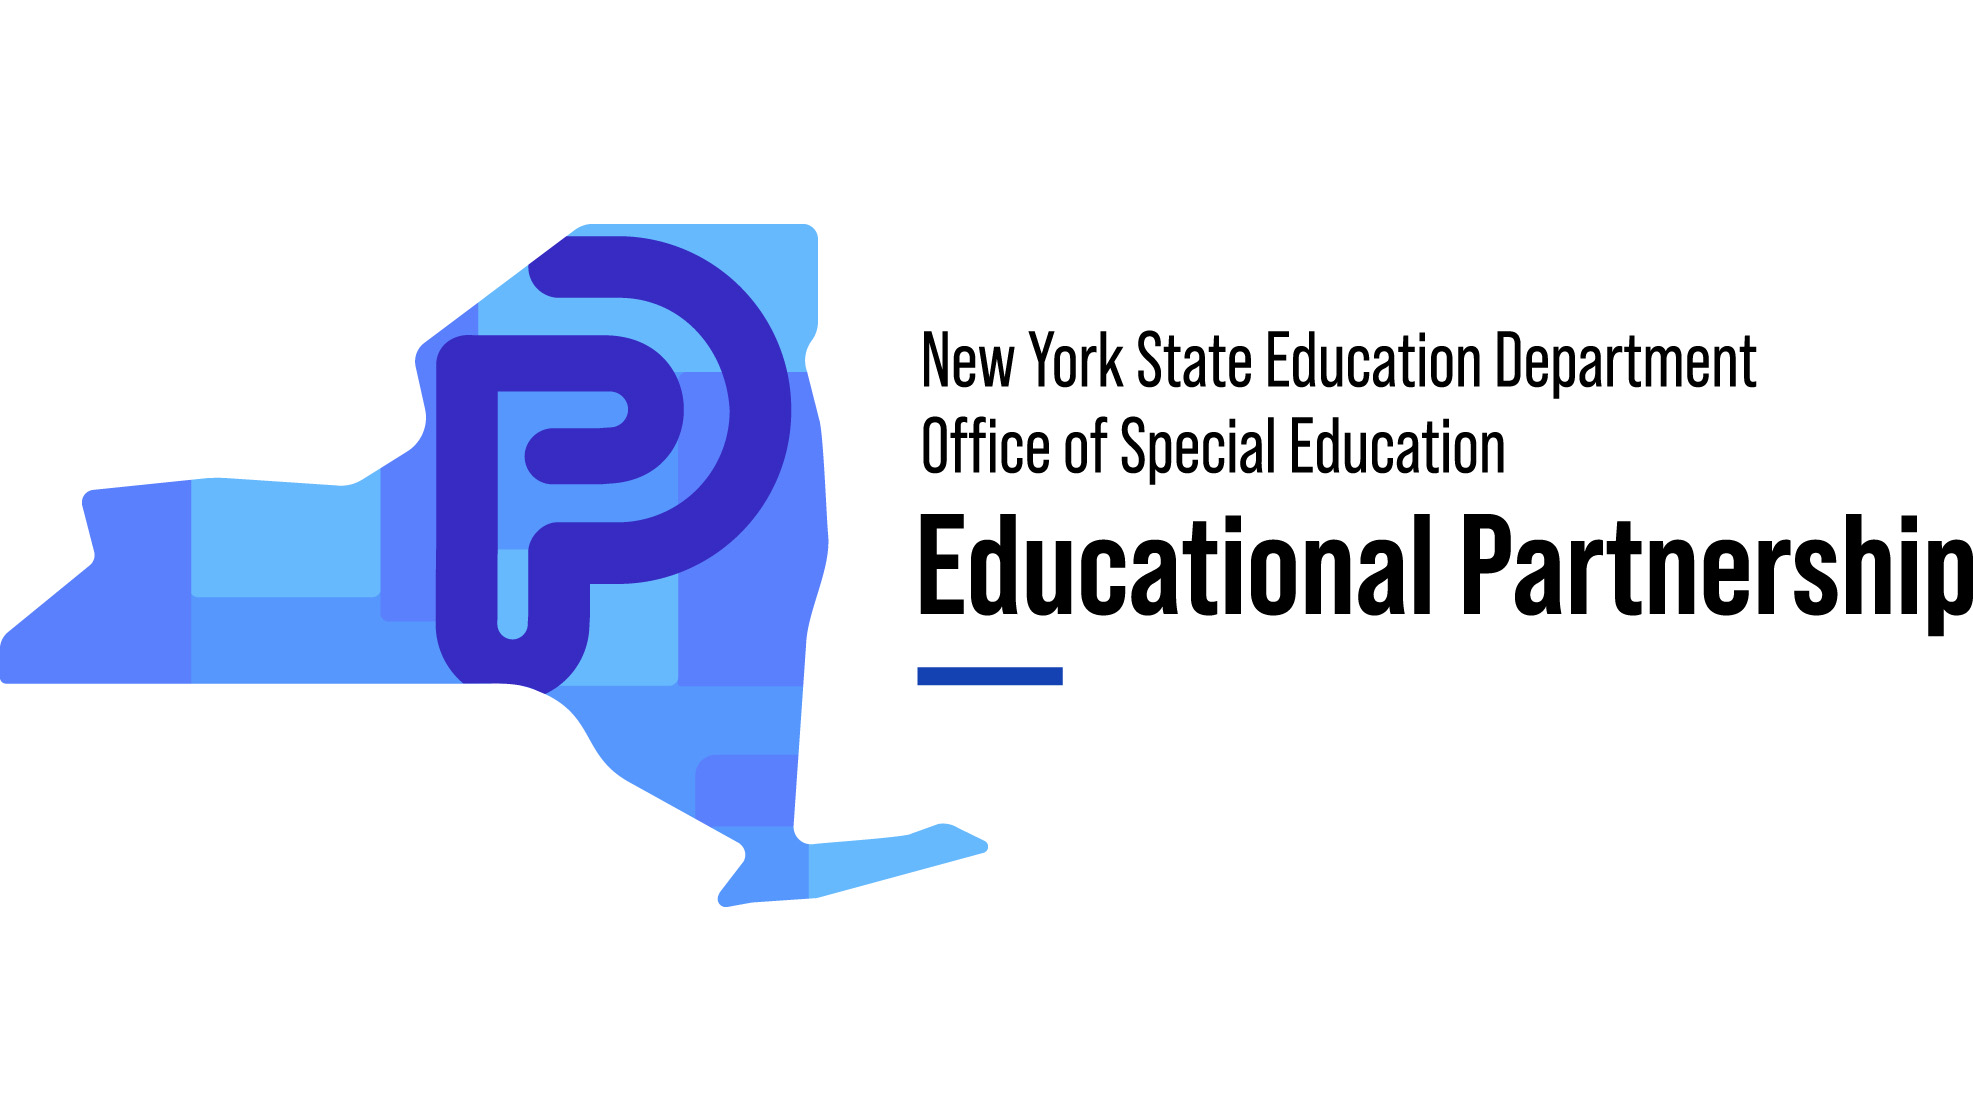 New York State Education Department Office of Special Education - Educational Partnership logo